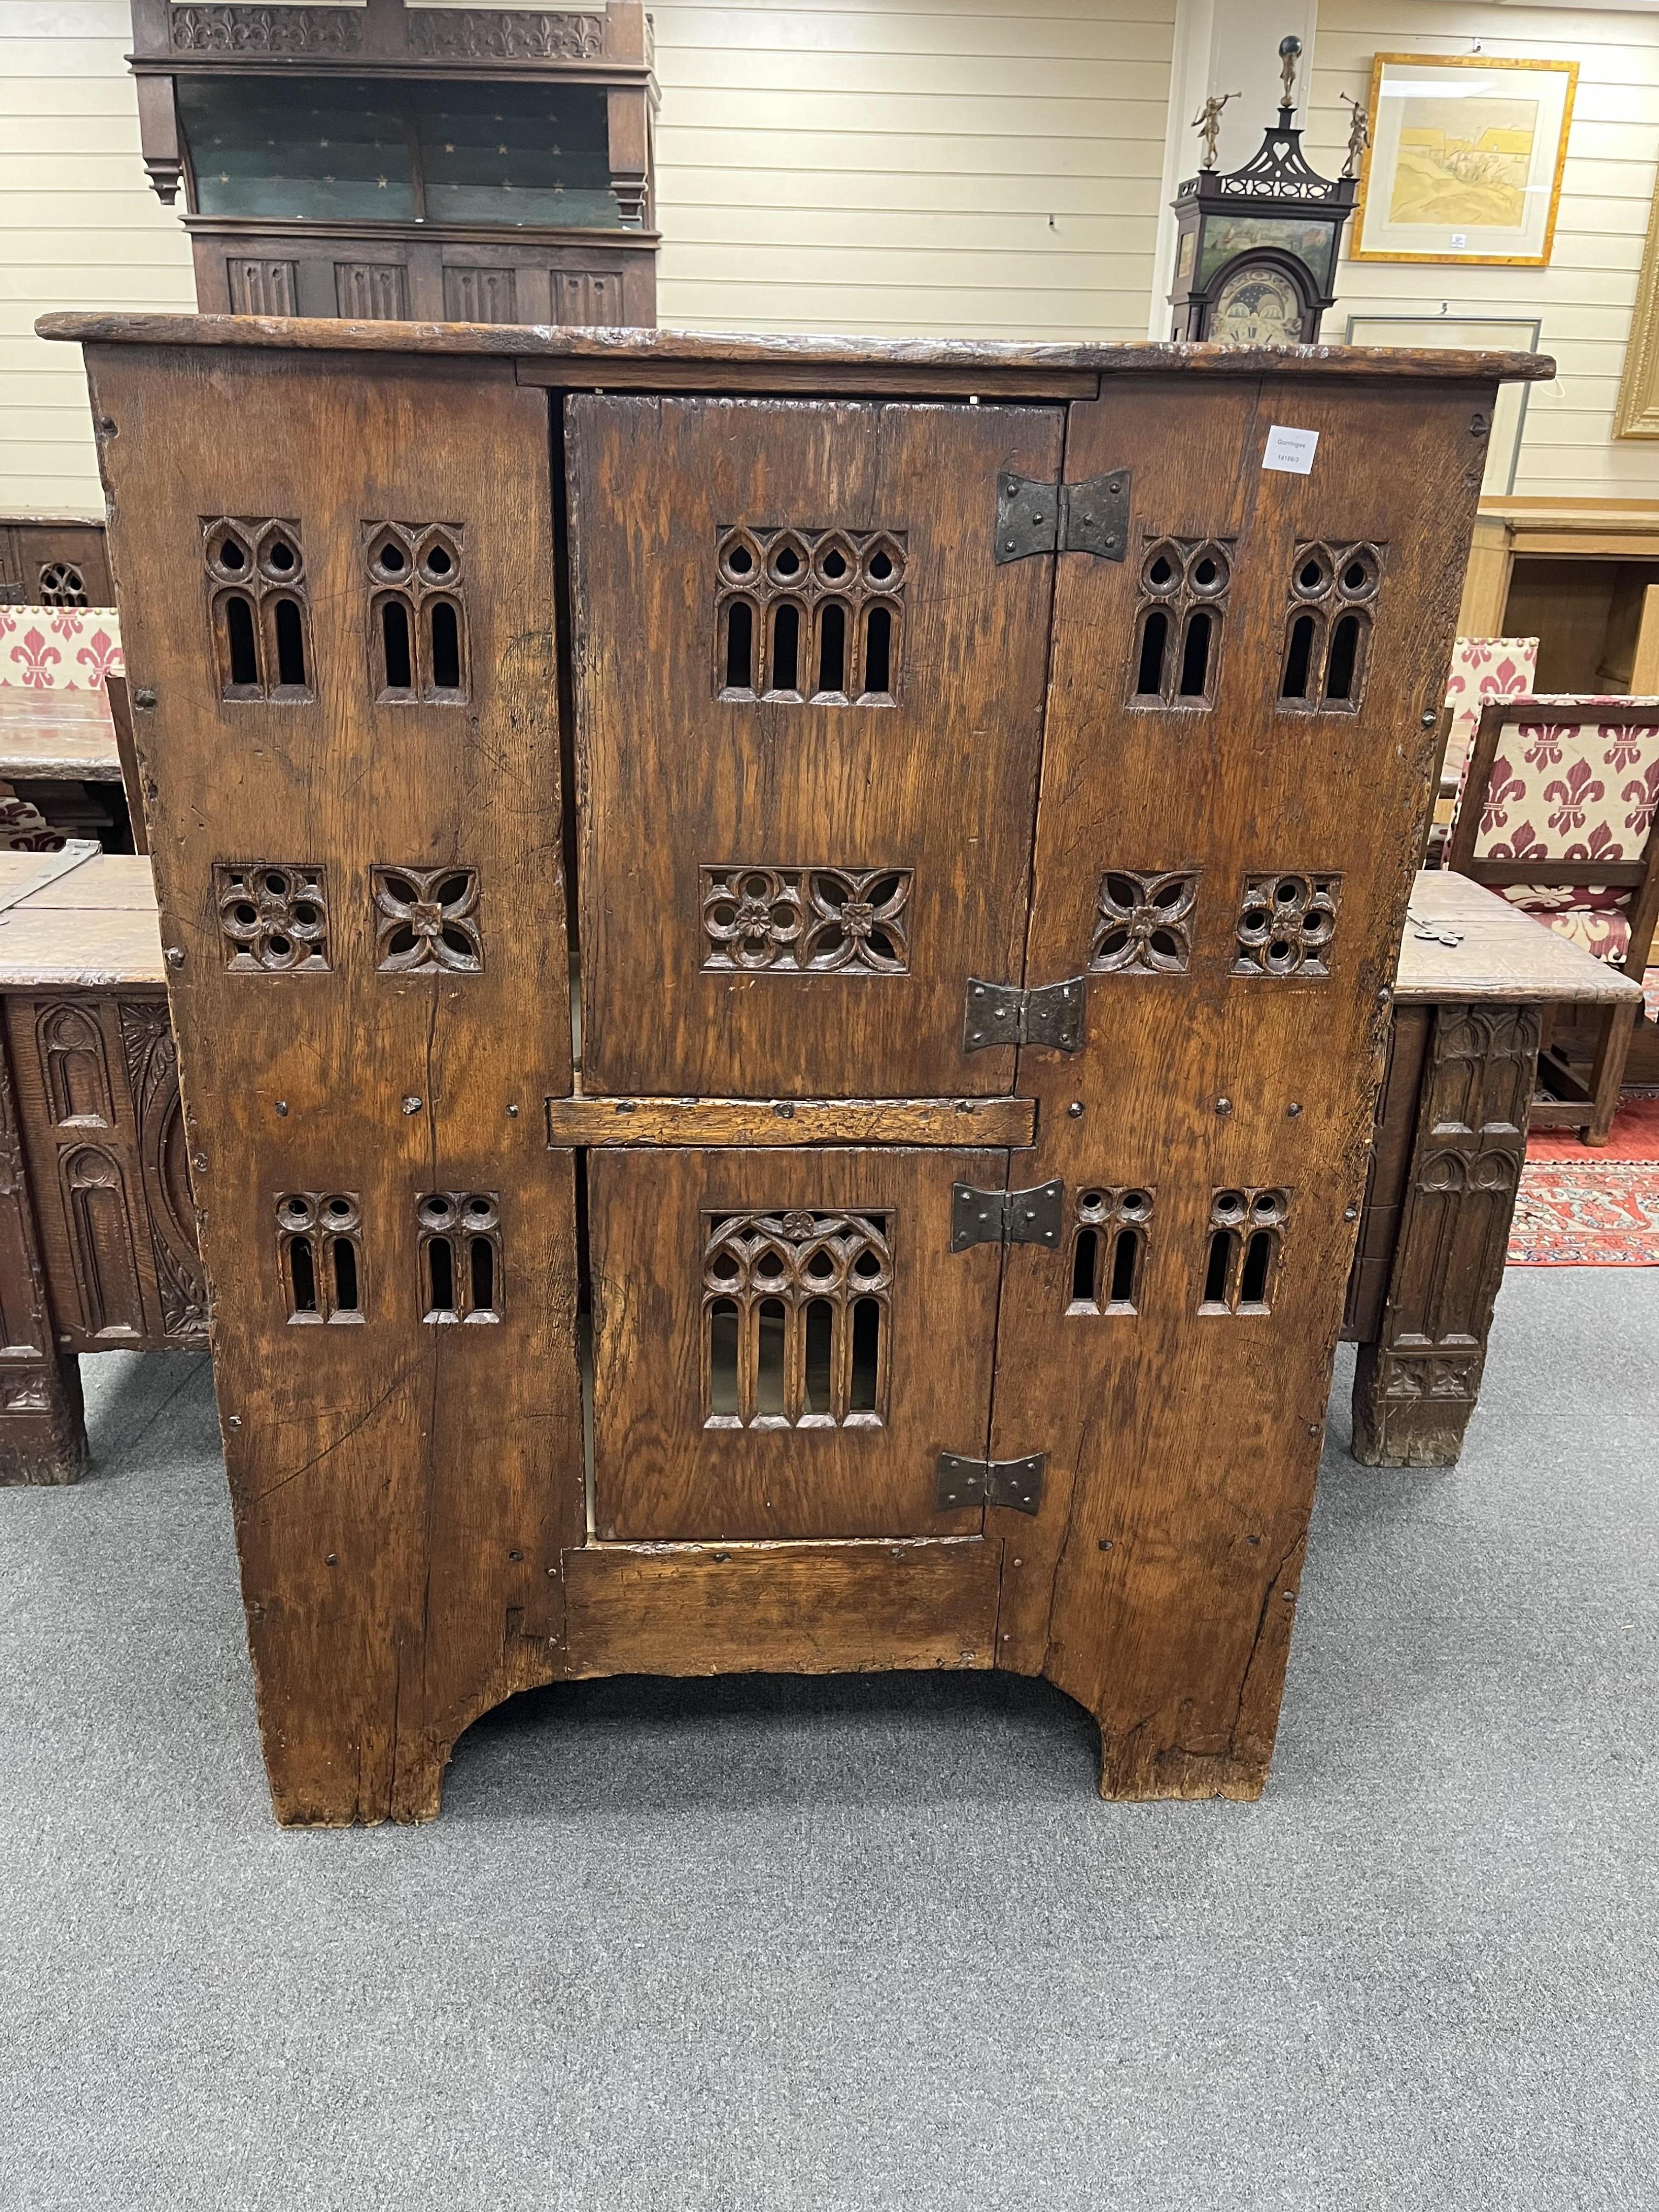 A large Gothic oak aumbry, in late 15th century style, with pierced fretwork panels, width 118cm, depth 53cm, height 151cm. Condition - good, Provenance - made for Brede Place, Brede, Rye, East Sussex. Commissioned from